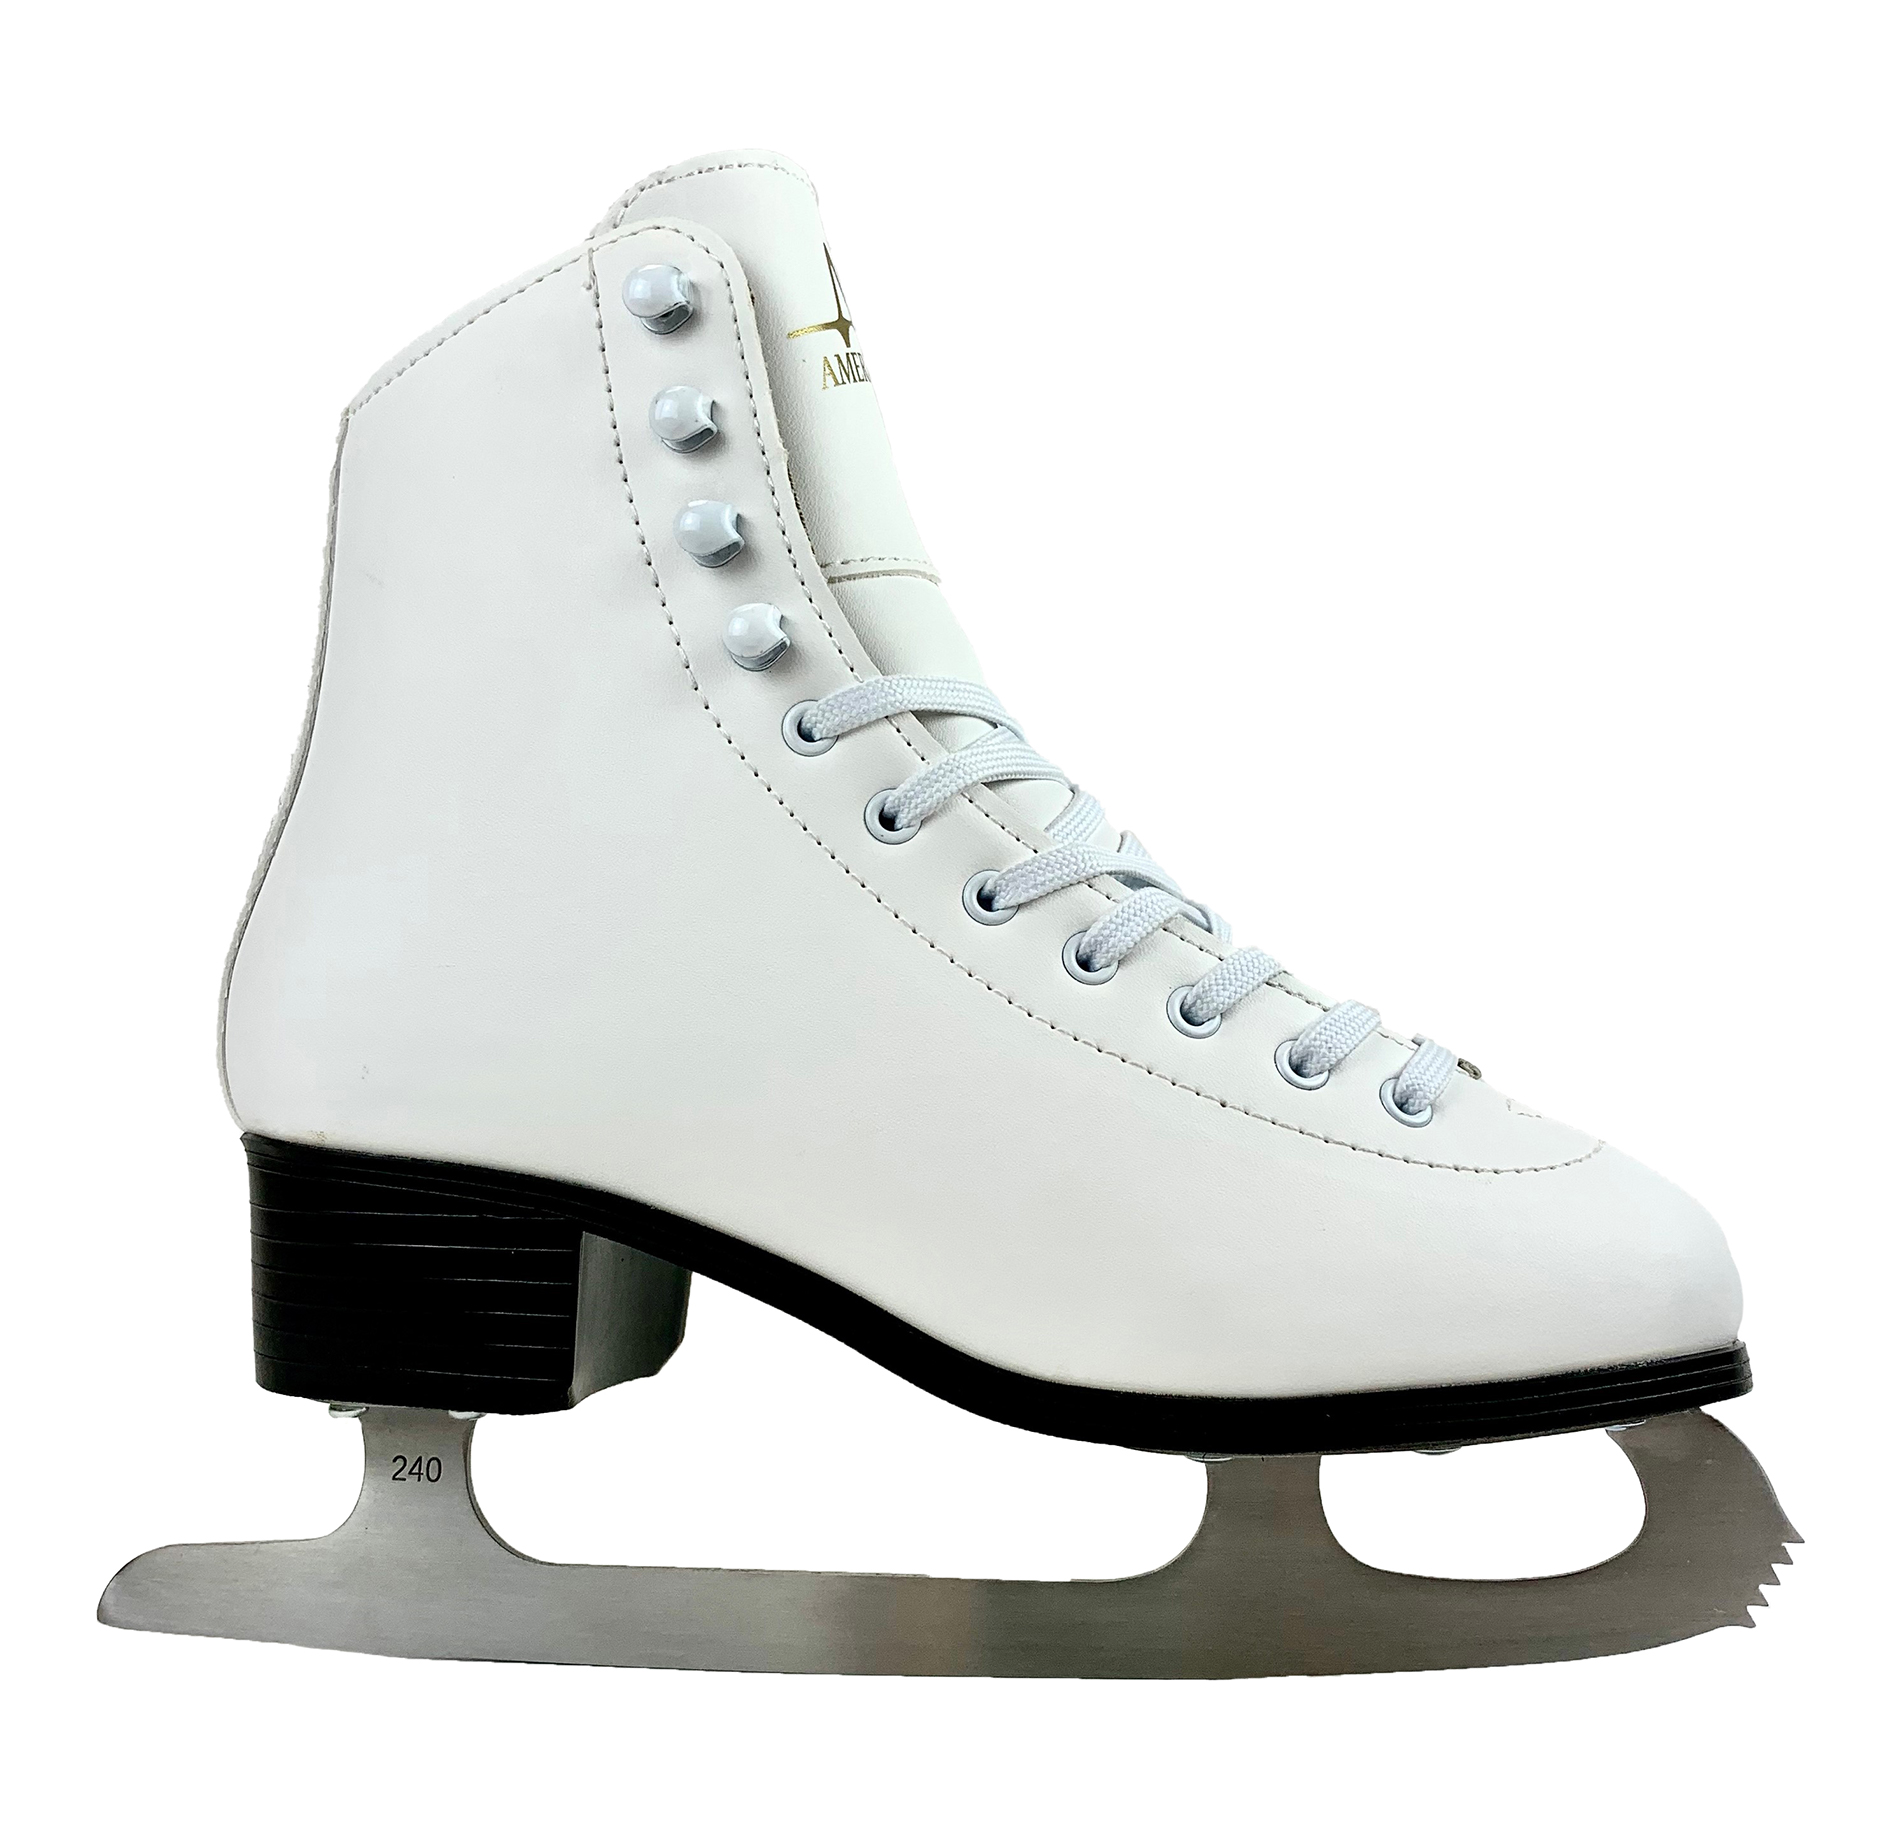 American Athletic Women's Tricot-Lined Ice Skates, Size 8 - image 5 of 5